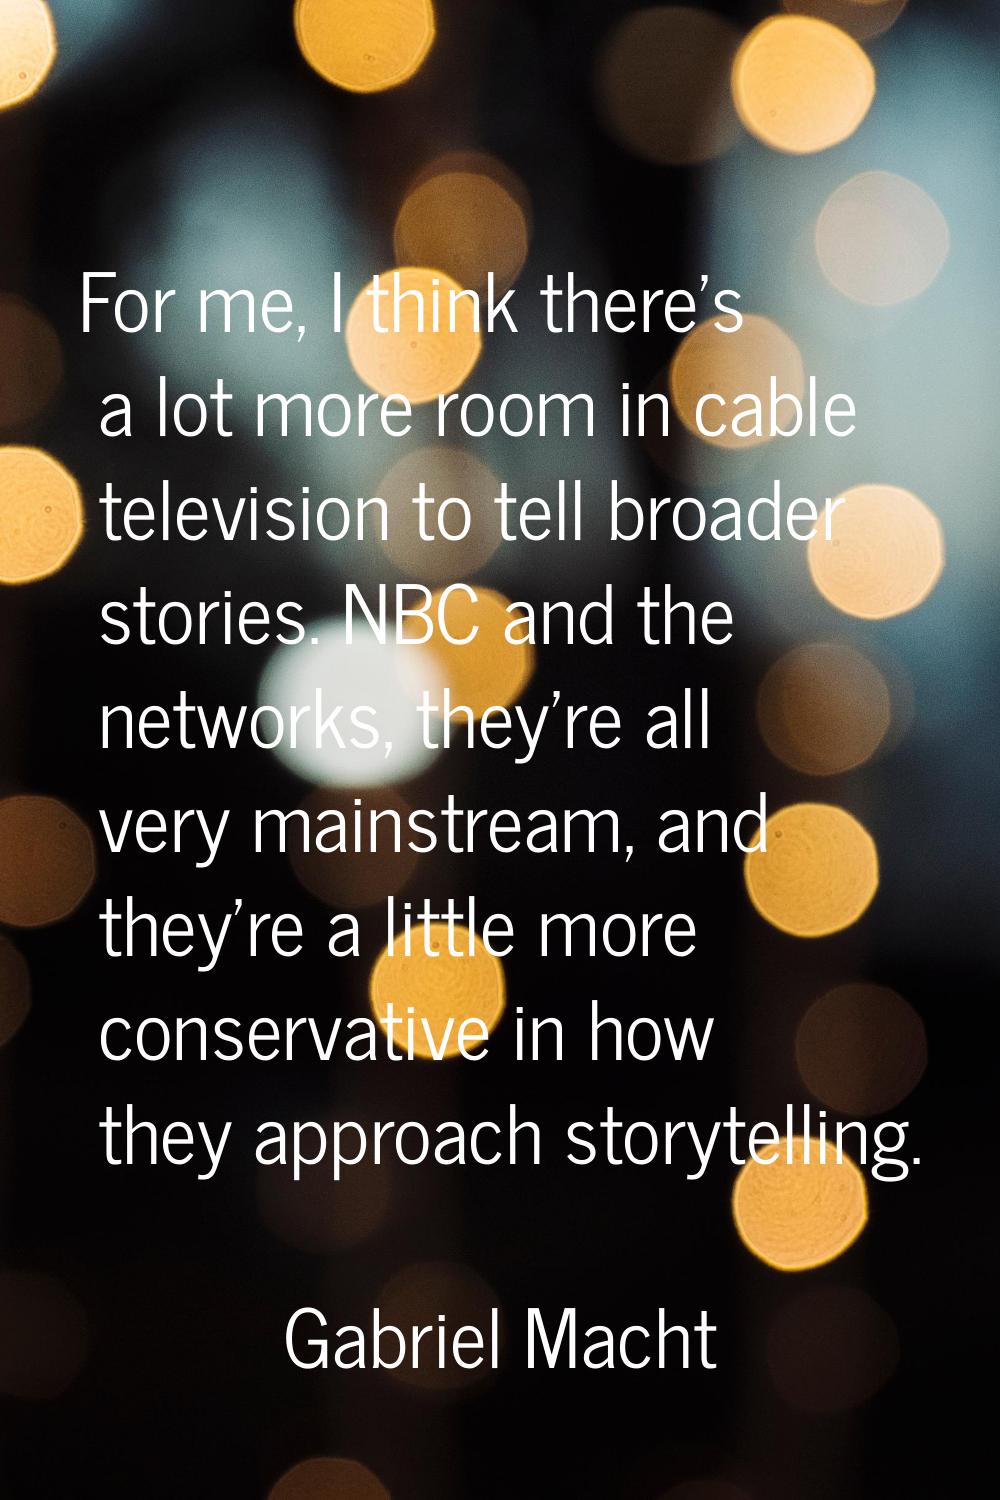 For me, I think there's a lot more room in cable television to tell broader stories. NBC and the ne